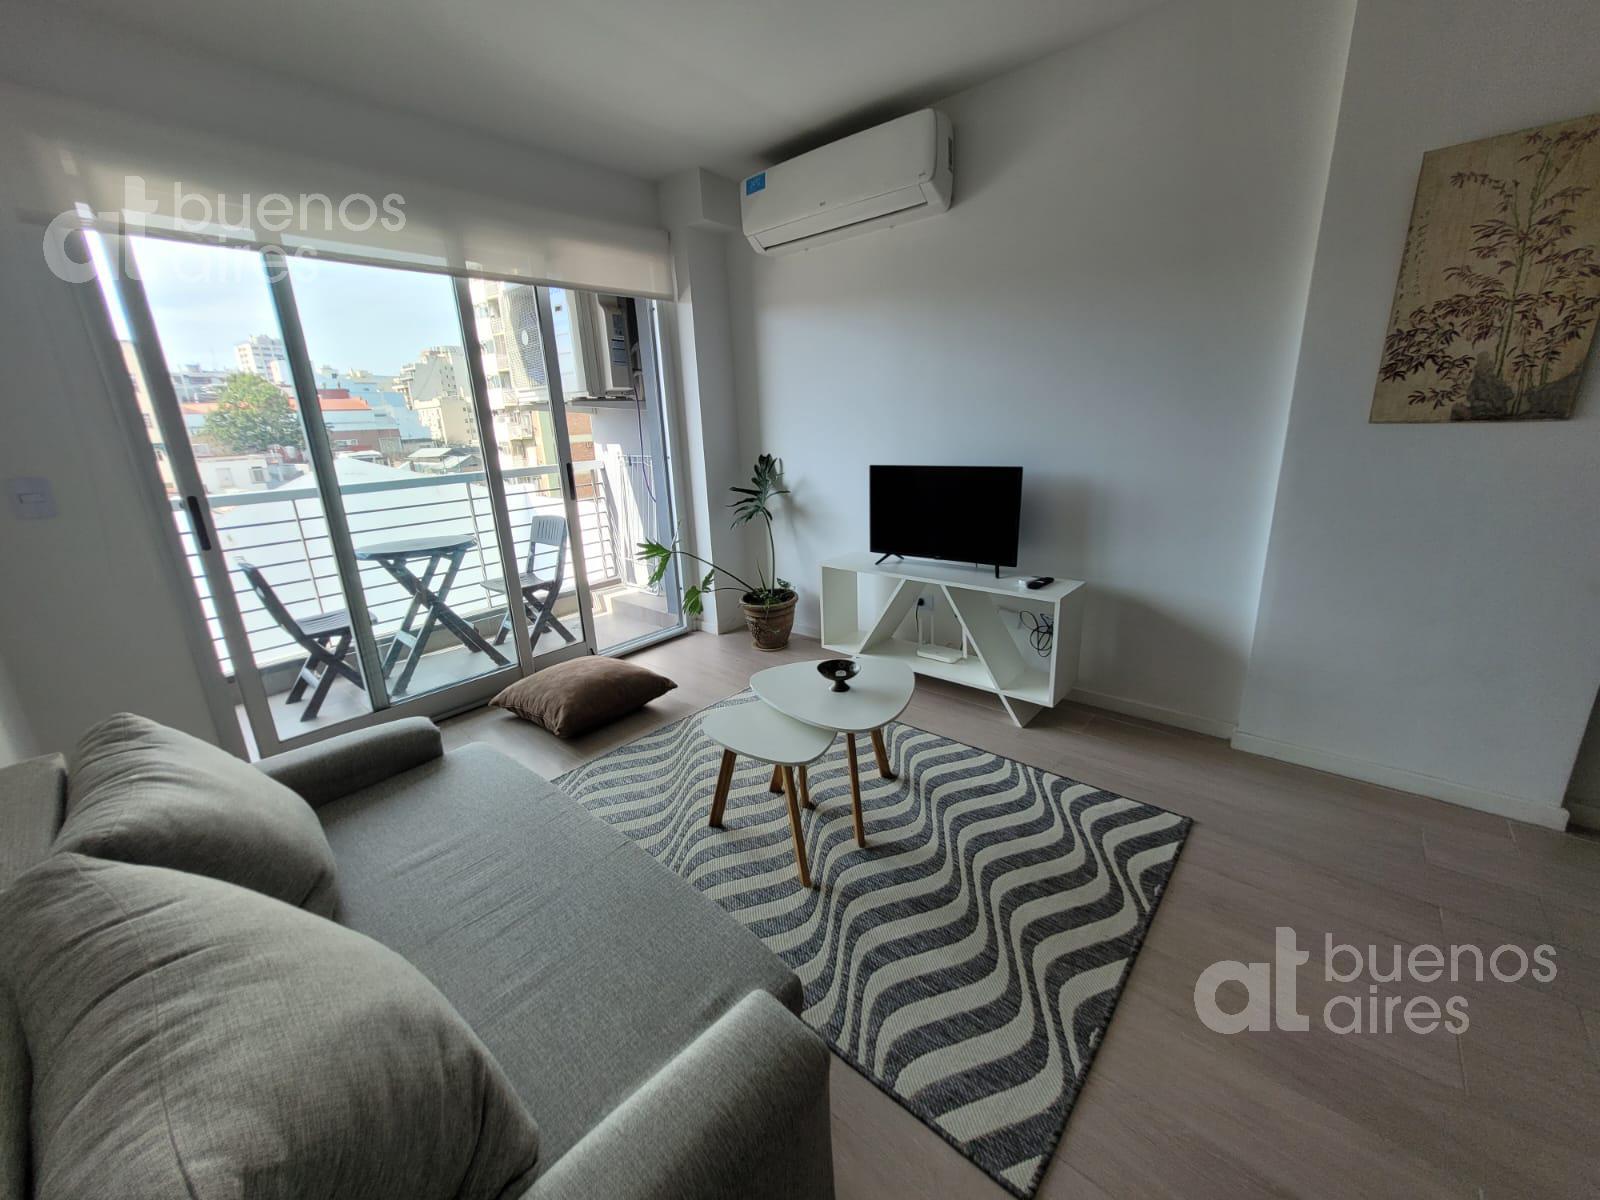 #5183061 | Temporary Rental | Apartment | Almagro (At Buenos Aires)